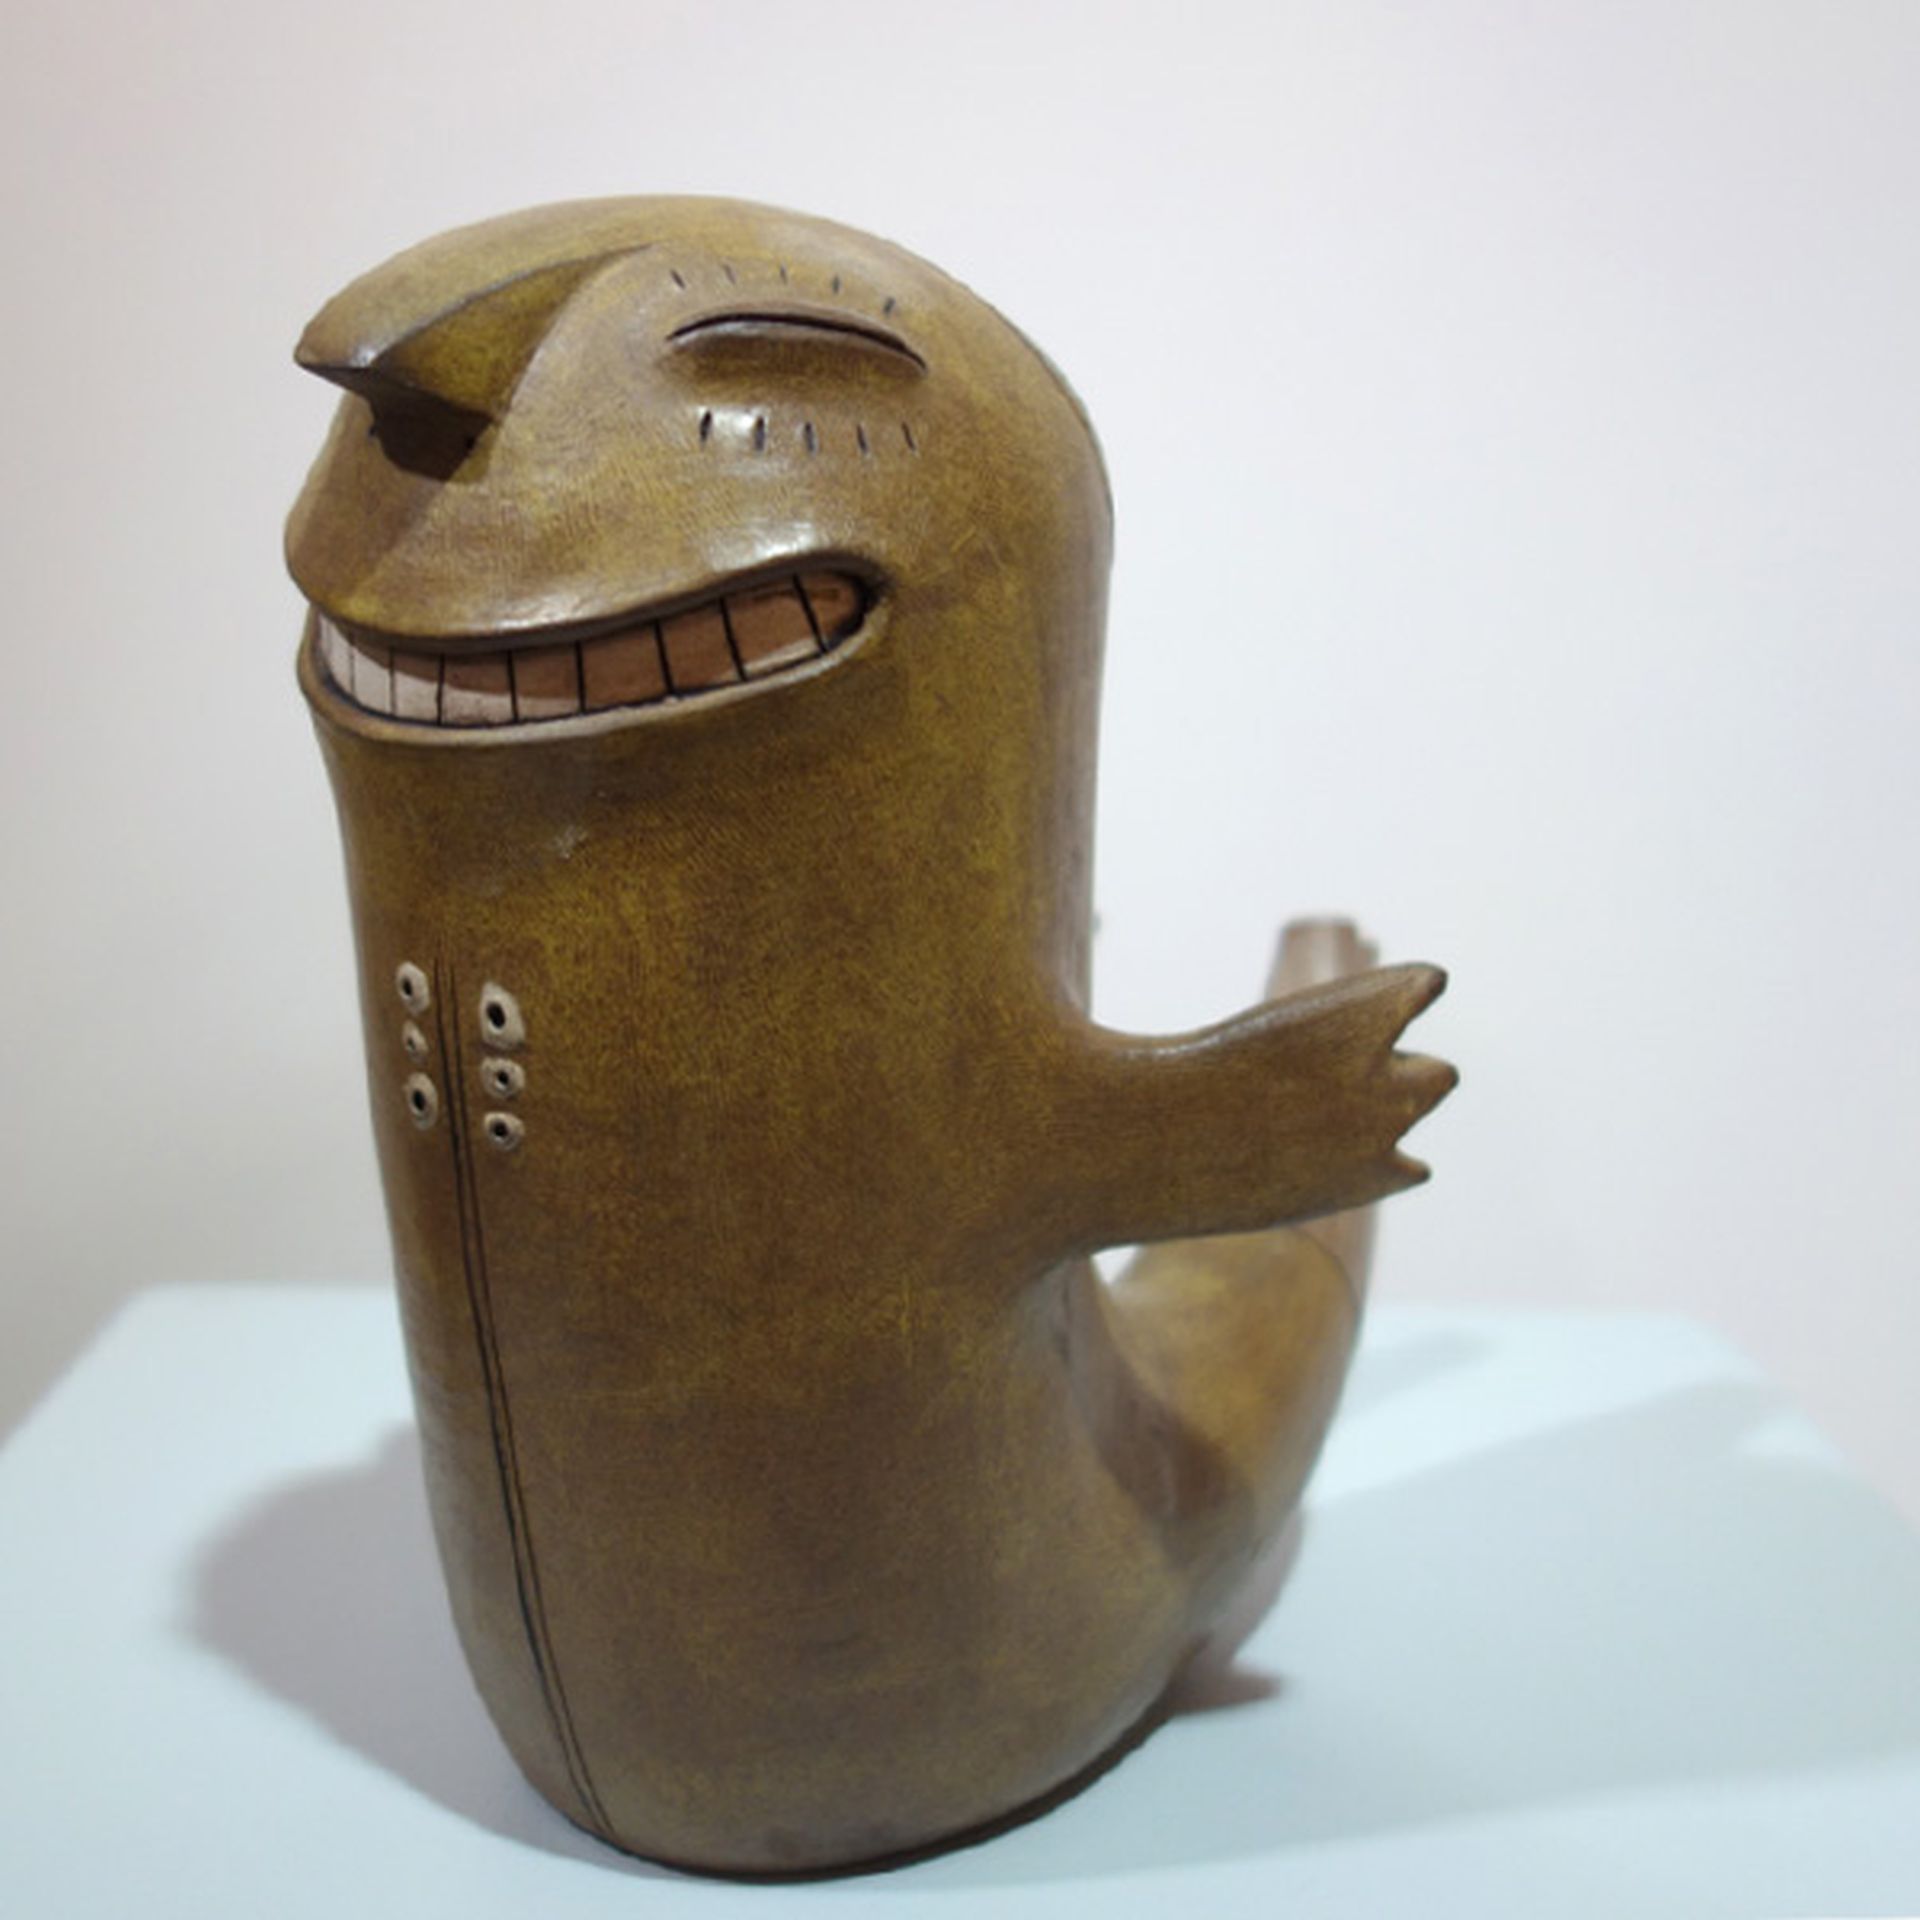 8 funny sculptures by luciano polverigiani